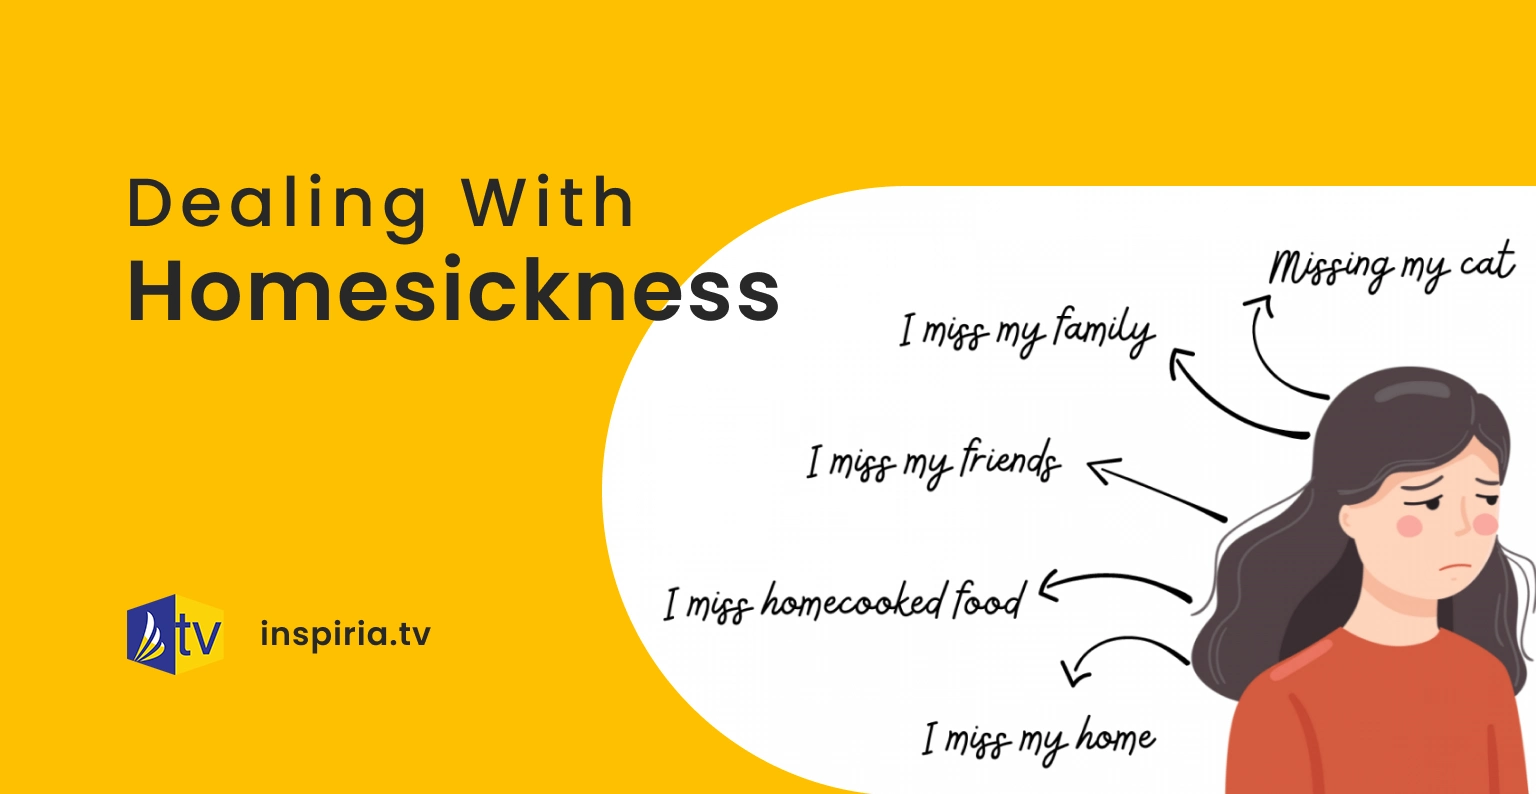 Dealing with homesickness